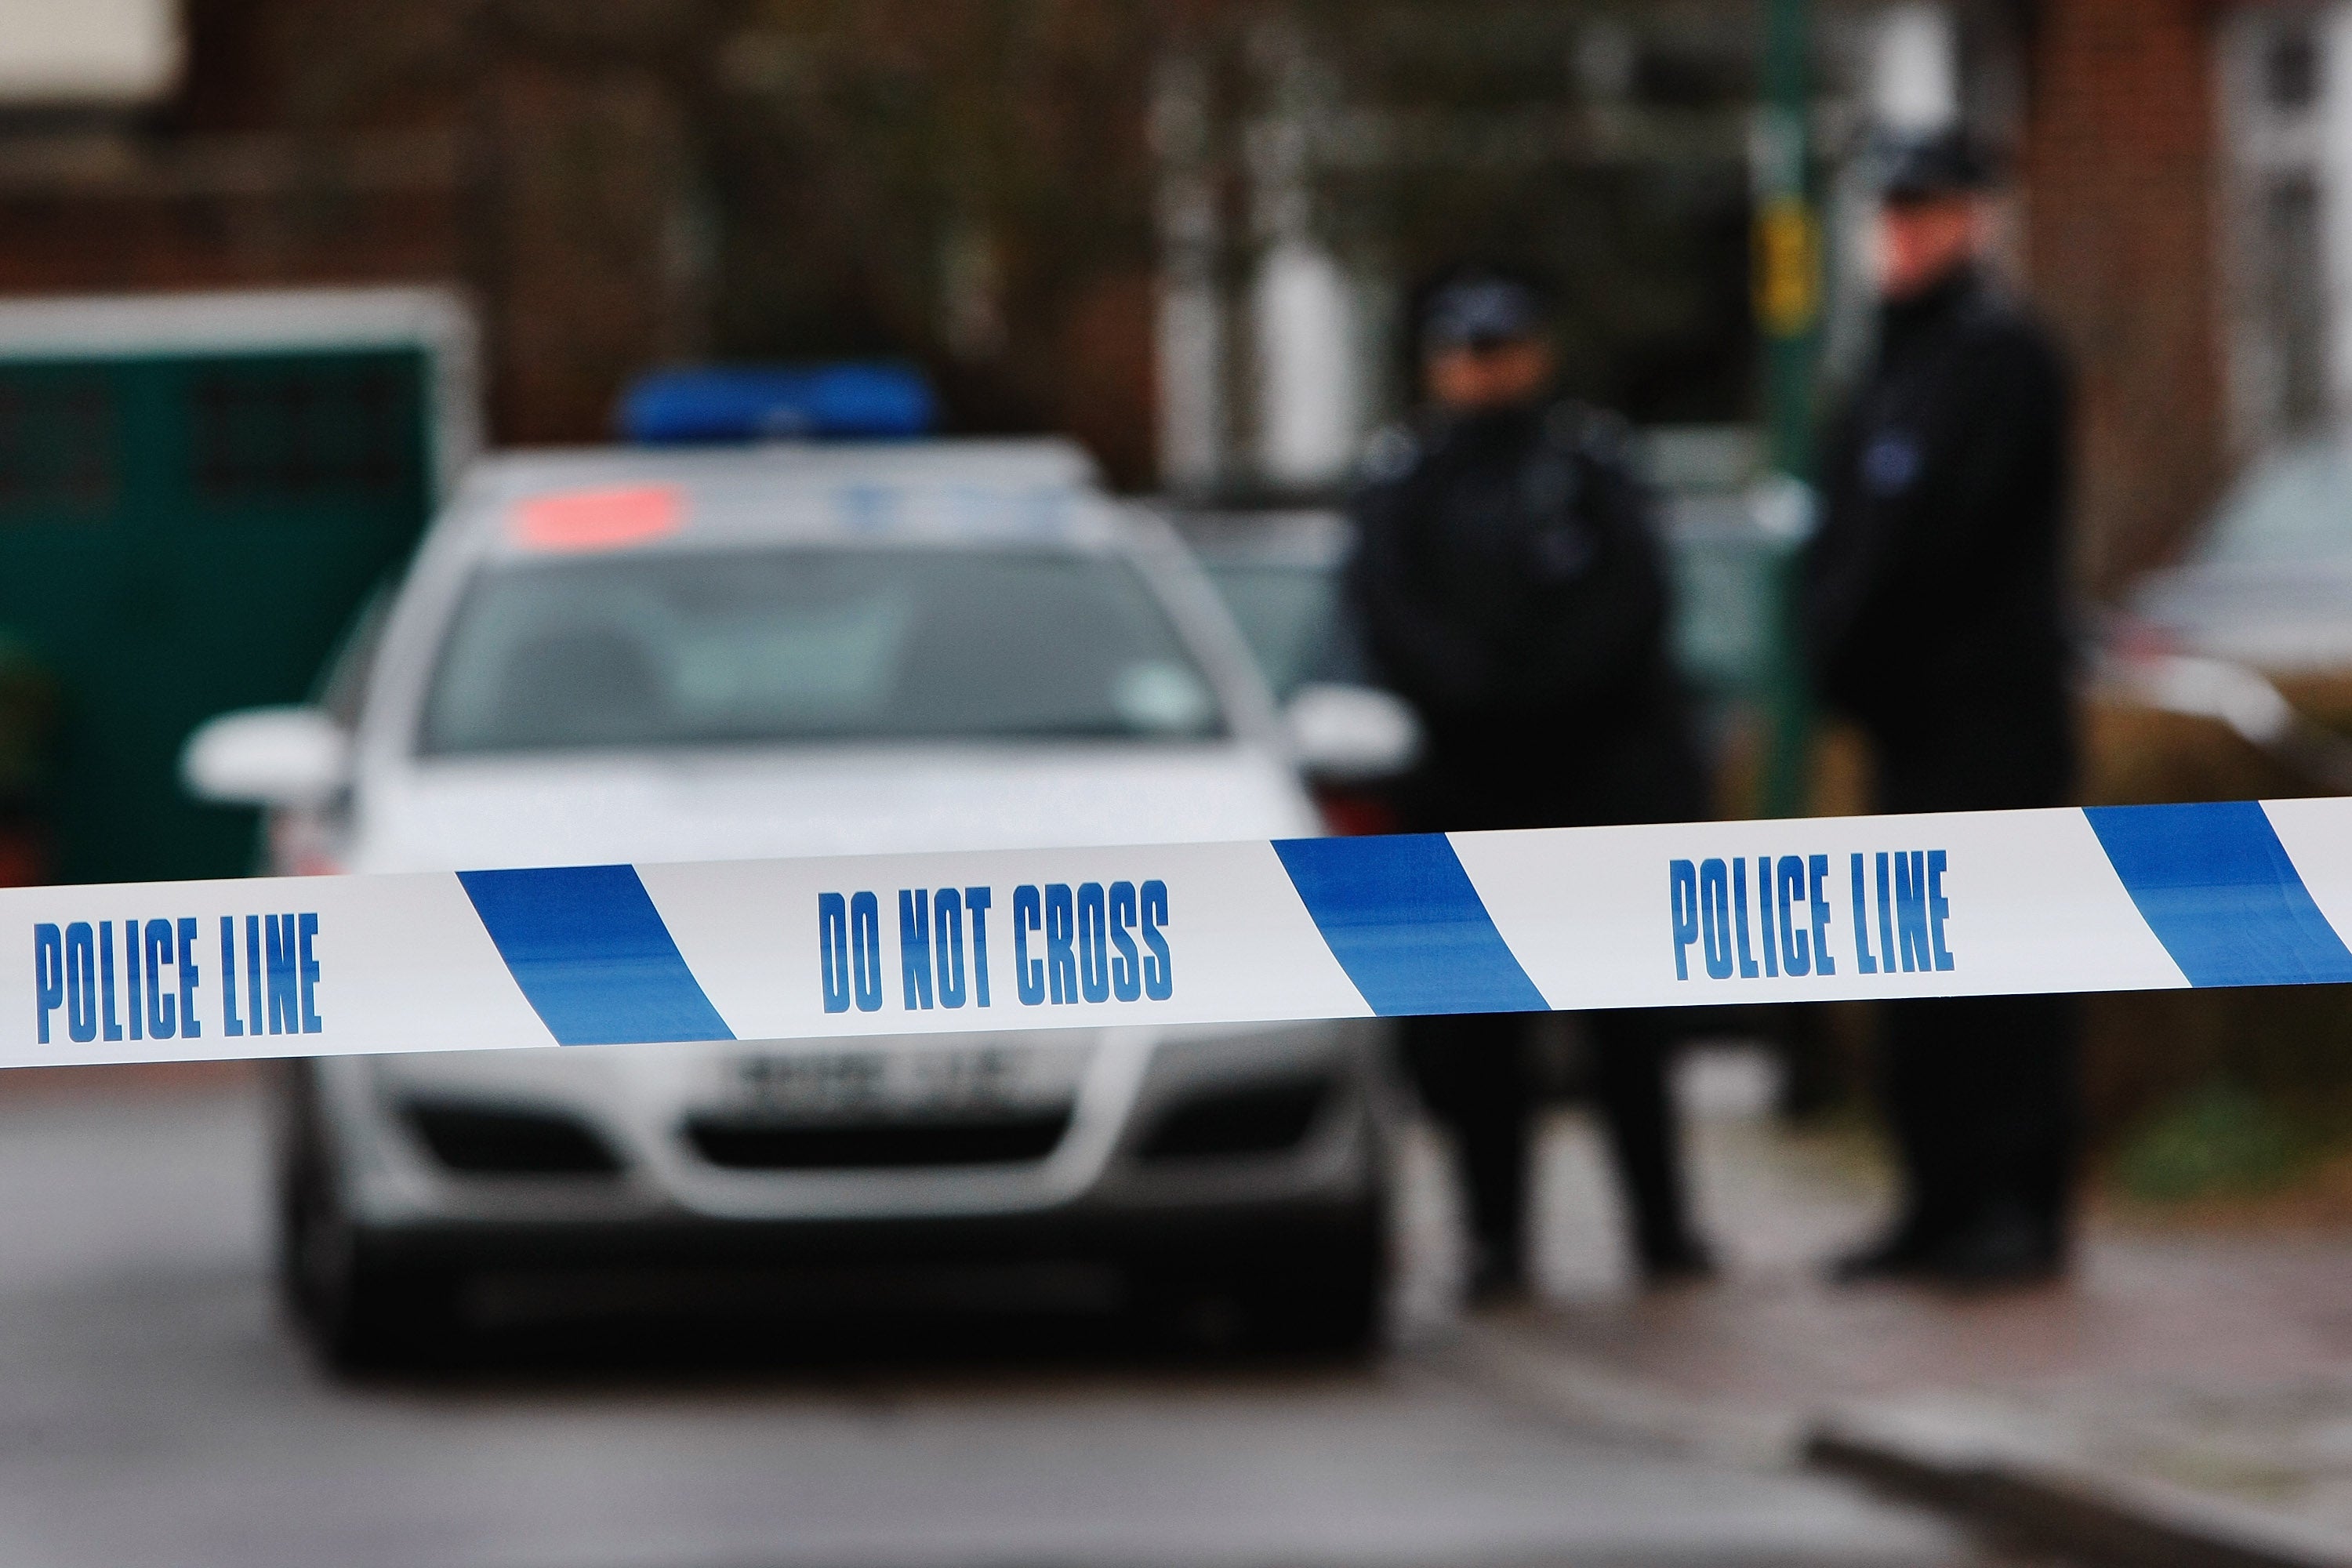 Police tape is pictured as officers stand guard outside of a house in Edgeware on December 27, 2007 in London, England. Police are investigating a fatal stabbing in West London.